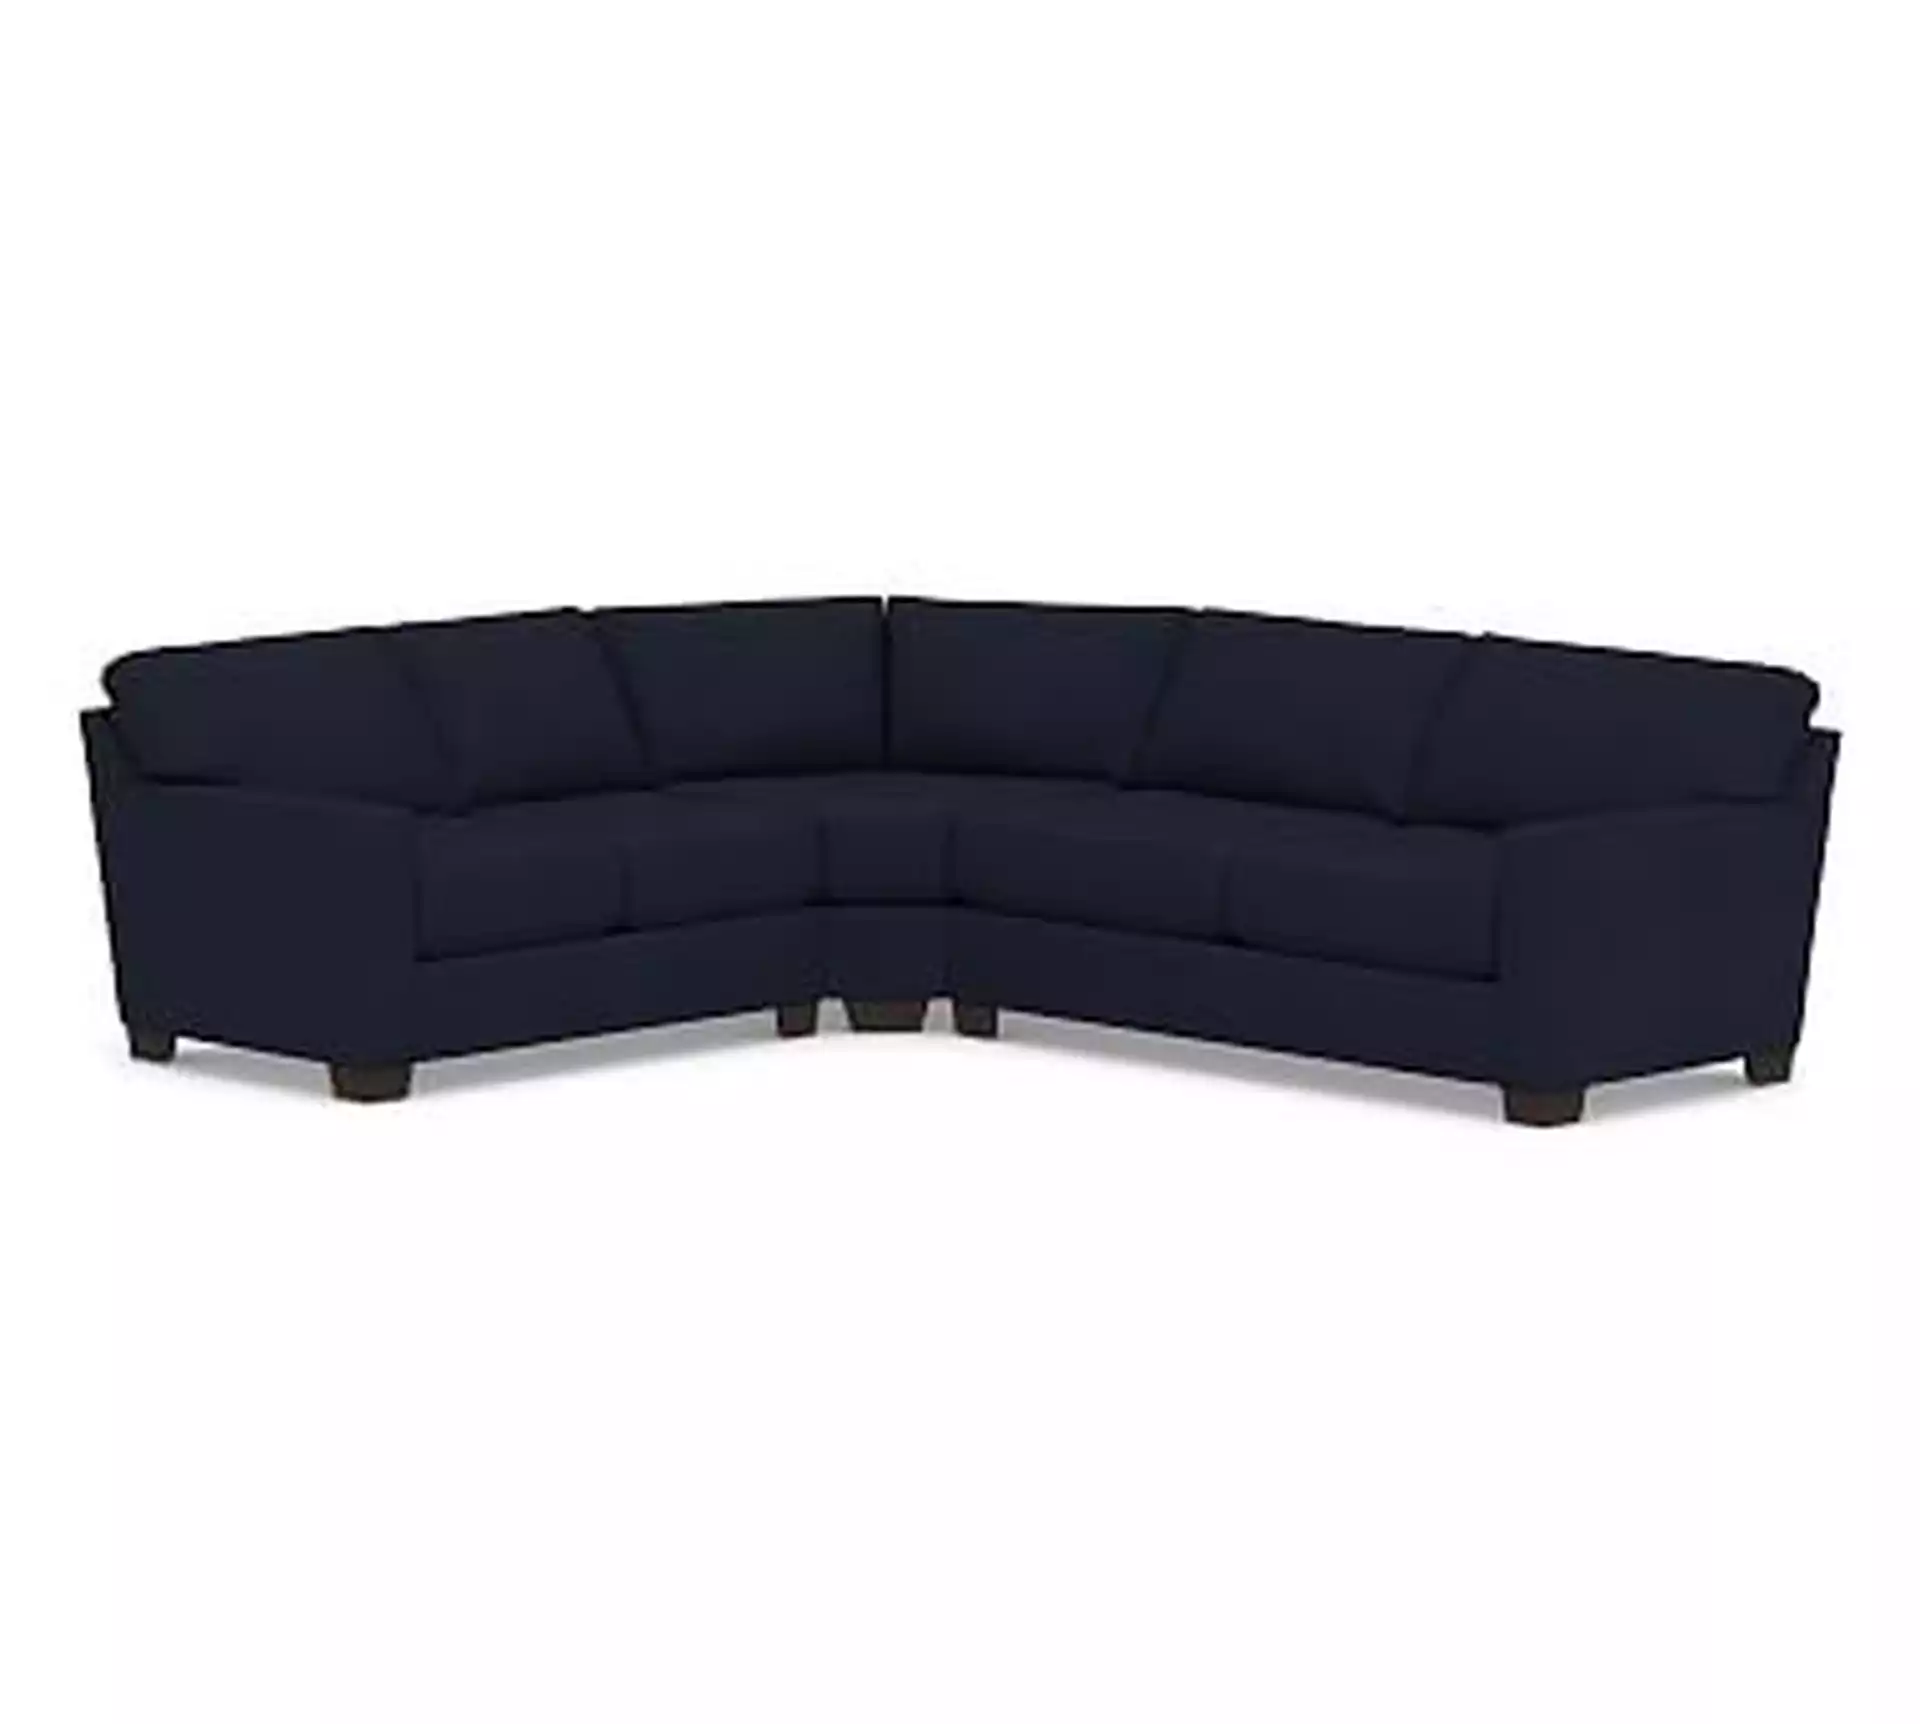 Buchanan Square Arm Upholstered Right Arm 3-Piece L-Shaped Wedge Sleeper Sectional, Polyester Wrapped Cushions, Twill Cadet Navy